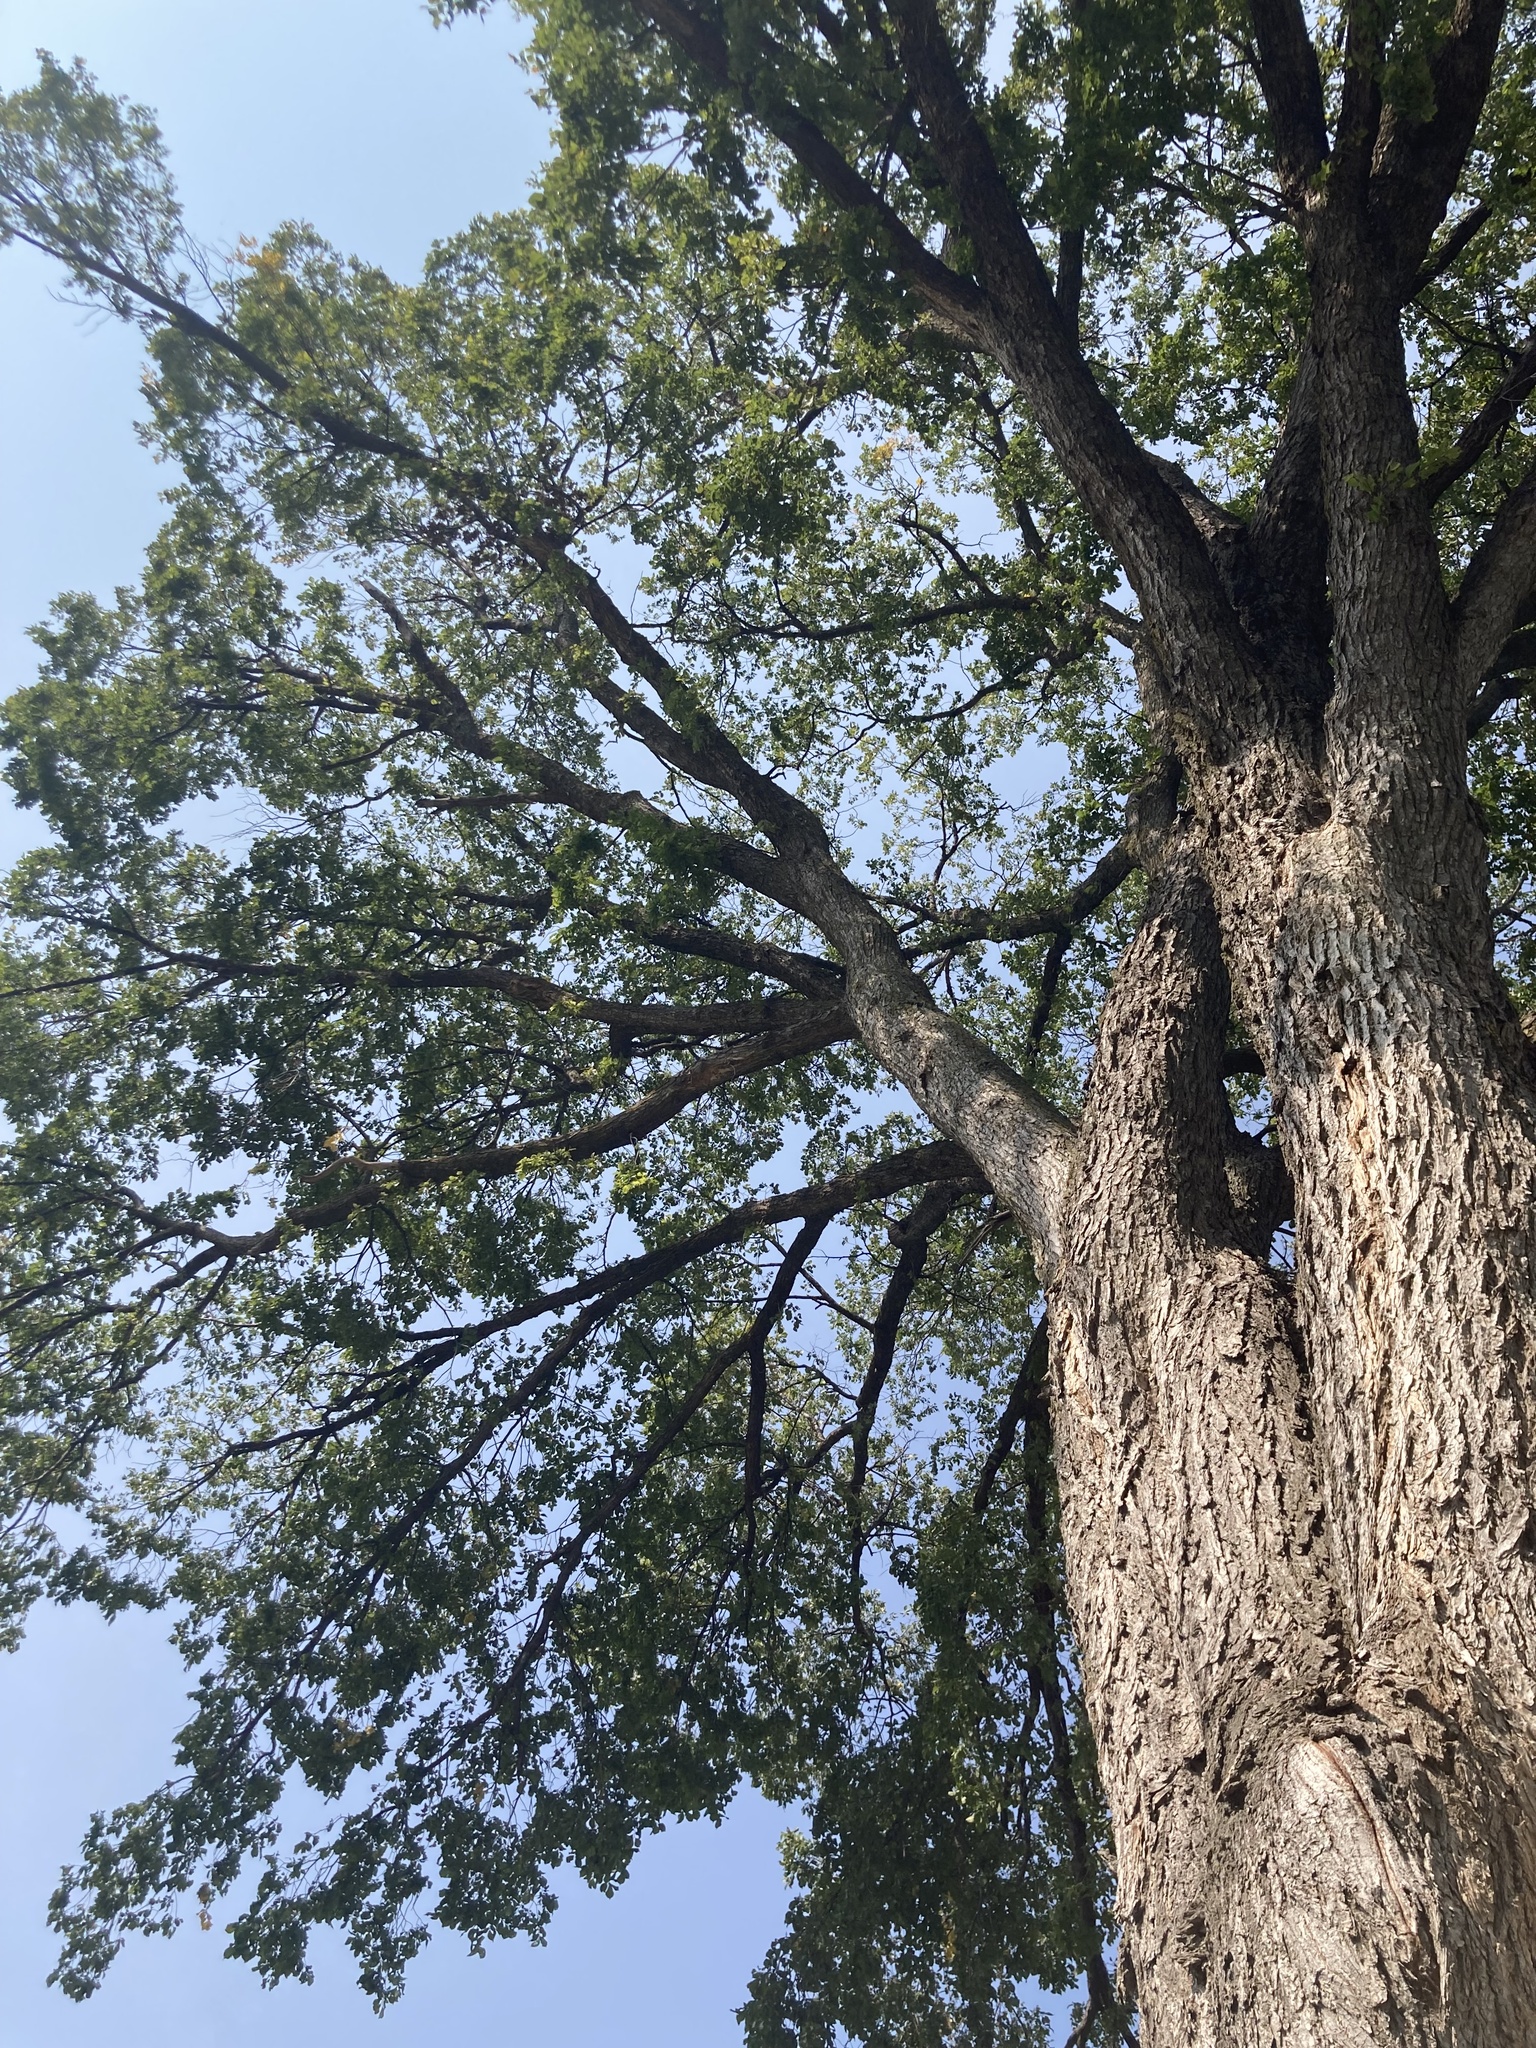 This large elm towers above the viewer and its great canopy contrasts against a blue sky.